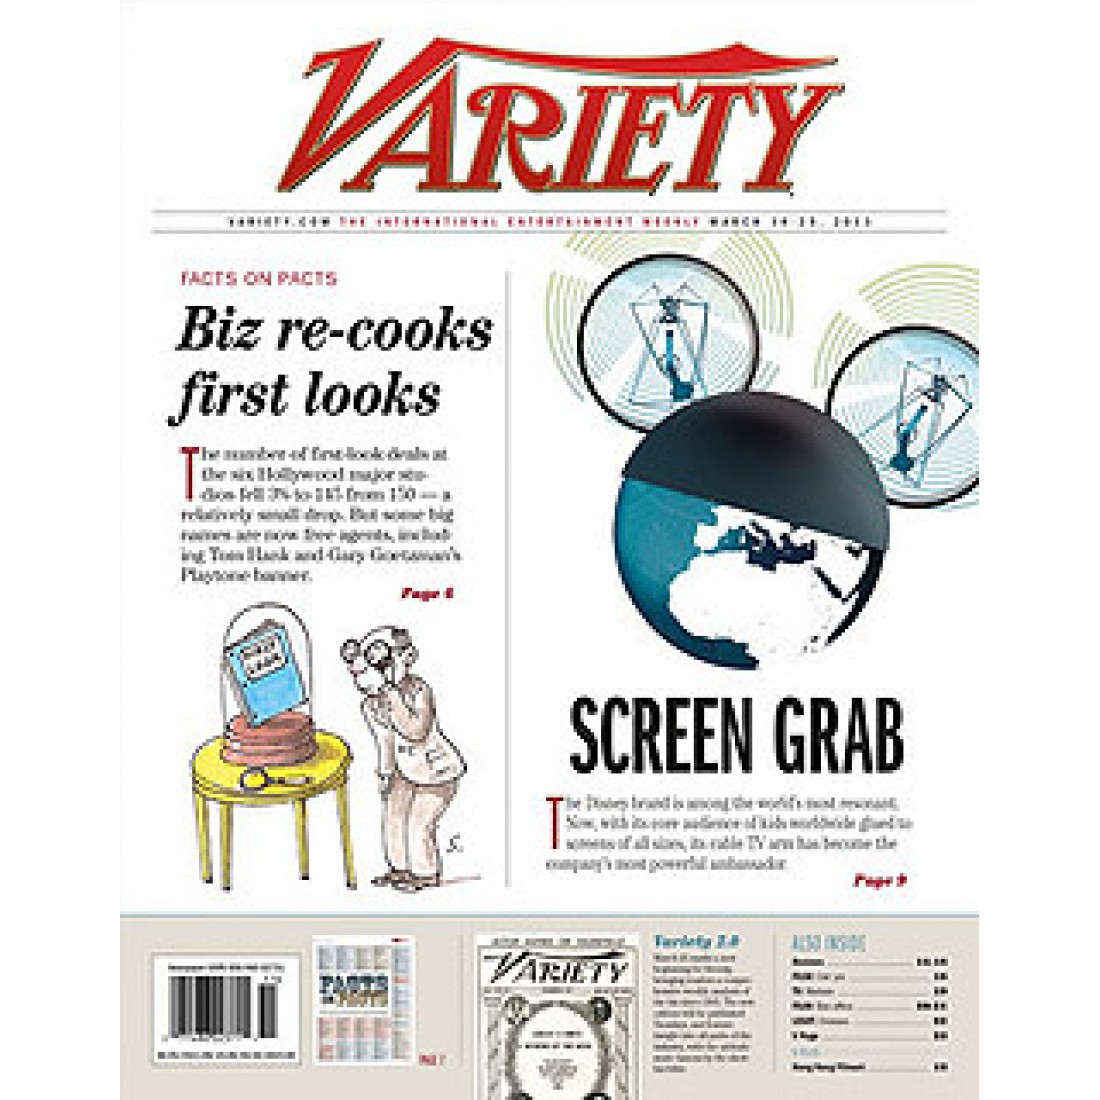 Daily Variety Magazine Subscriber Services